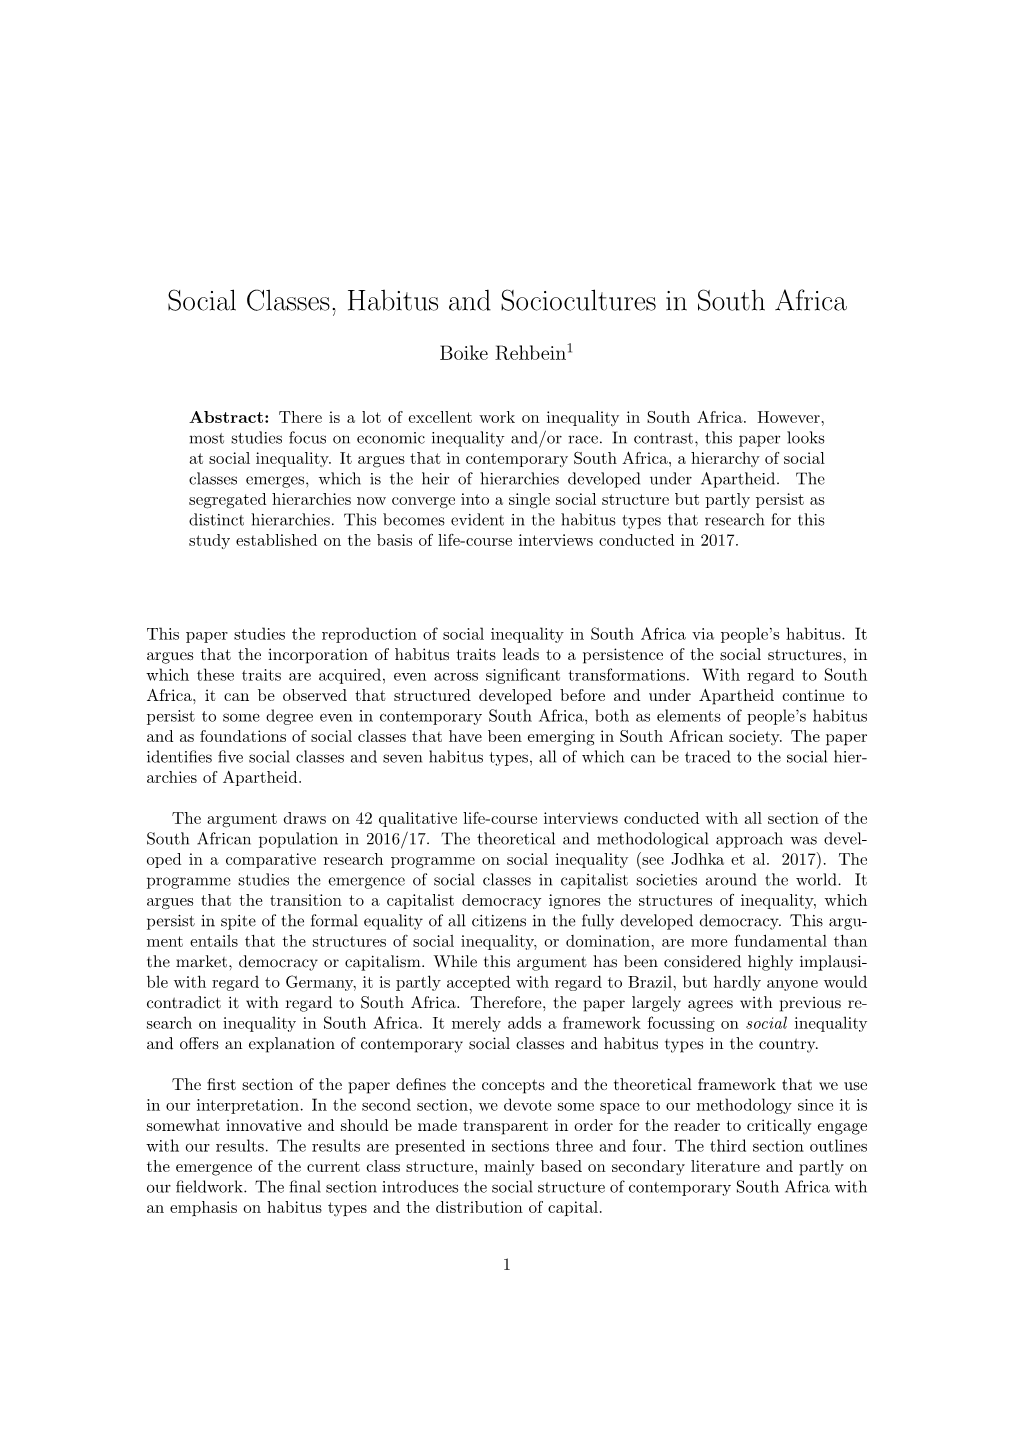 Social Classes, Habitus and Sociocultures in South Africa